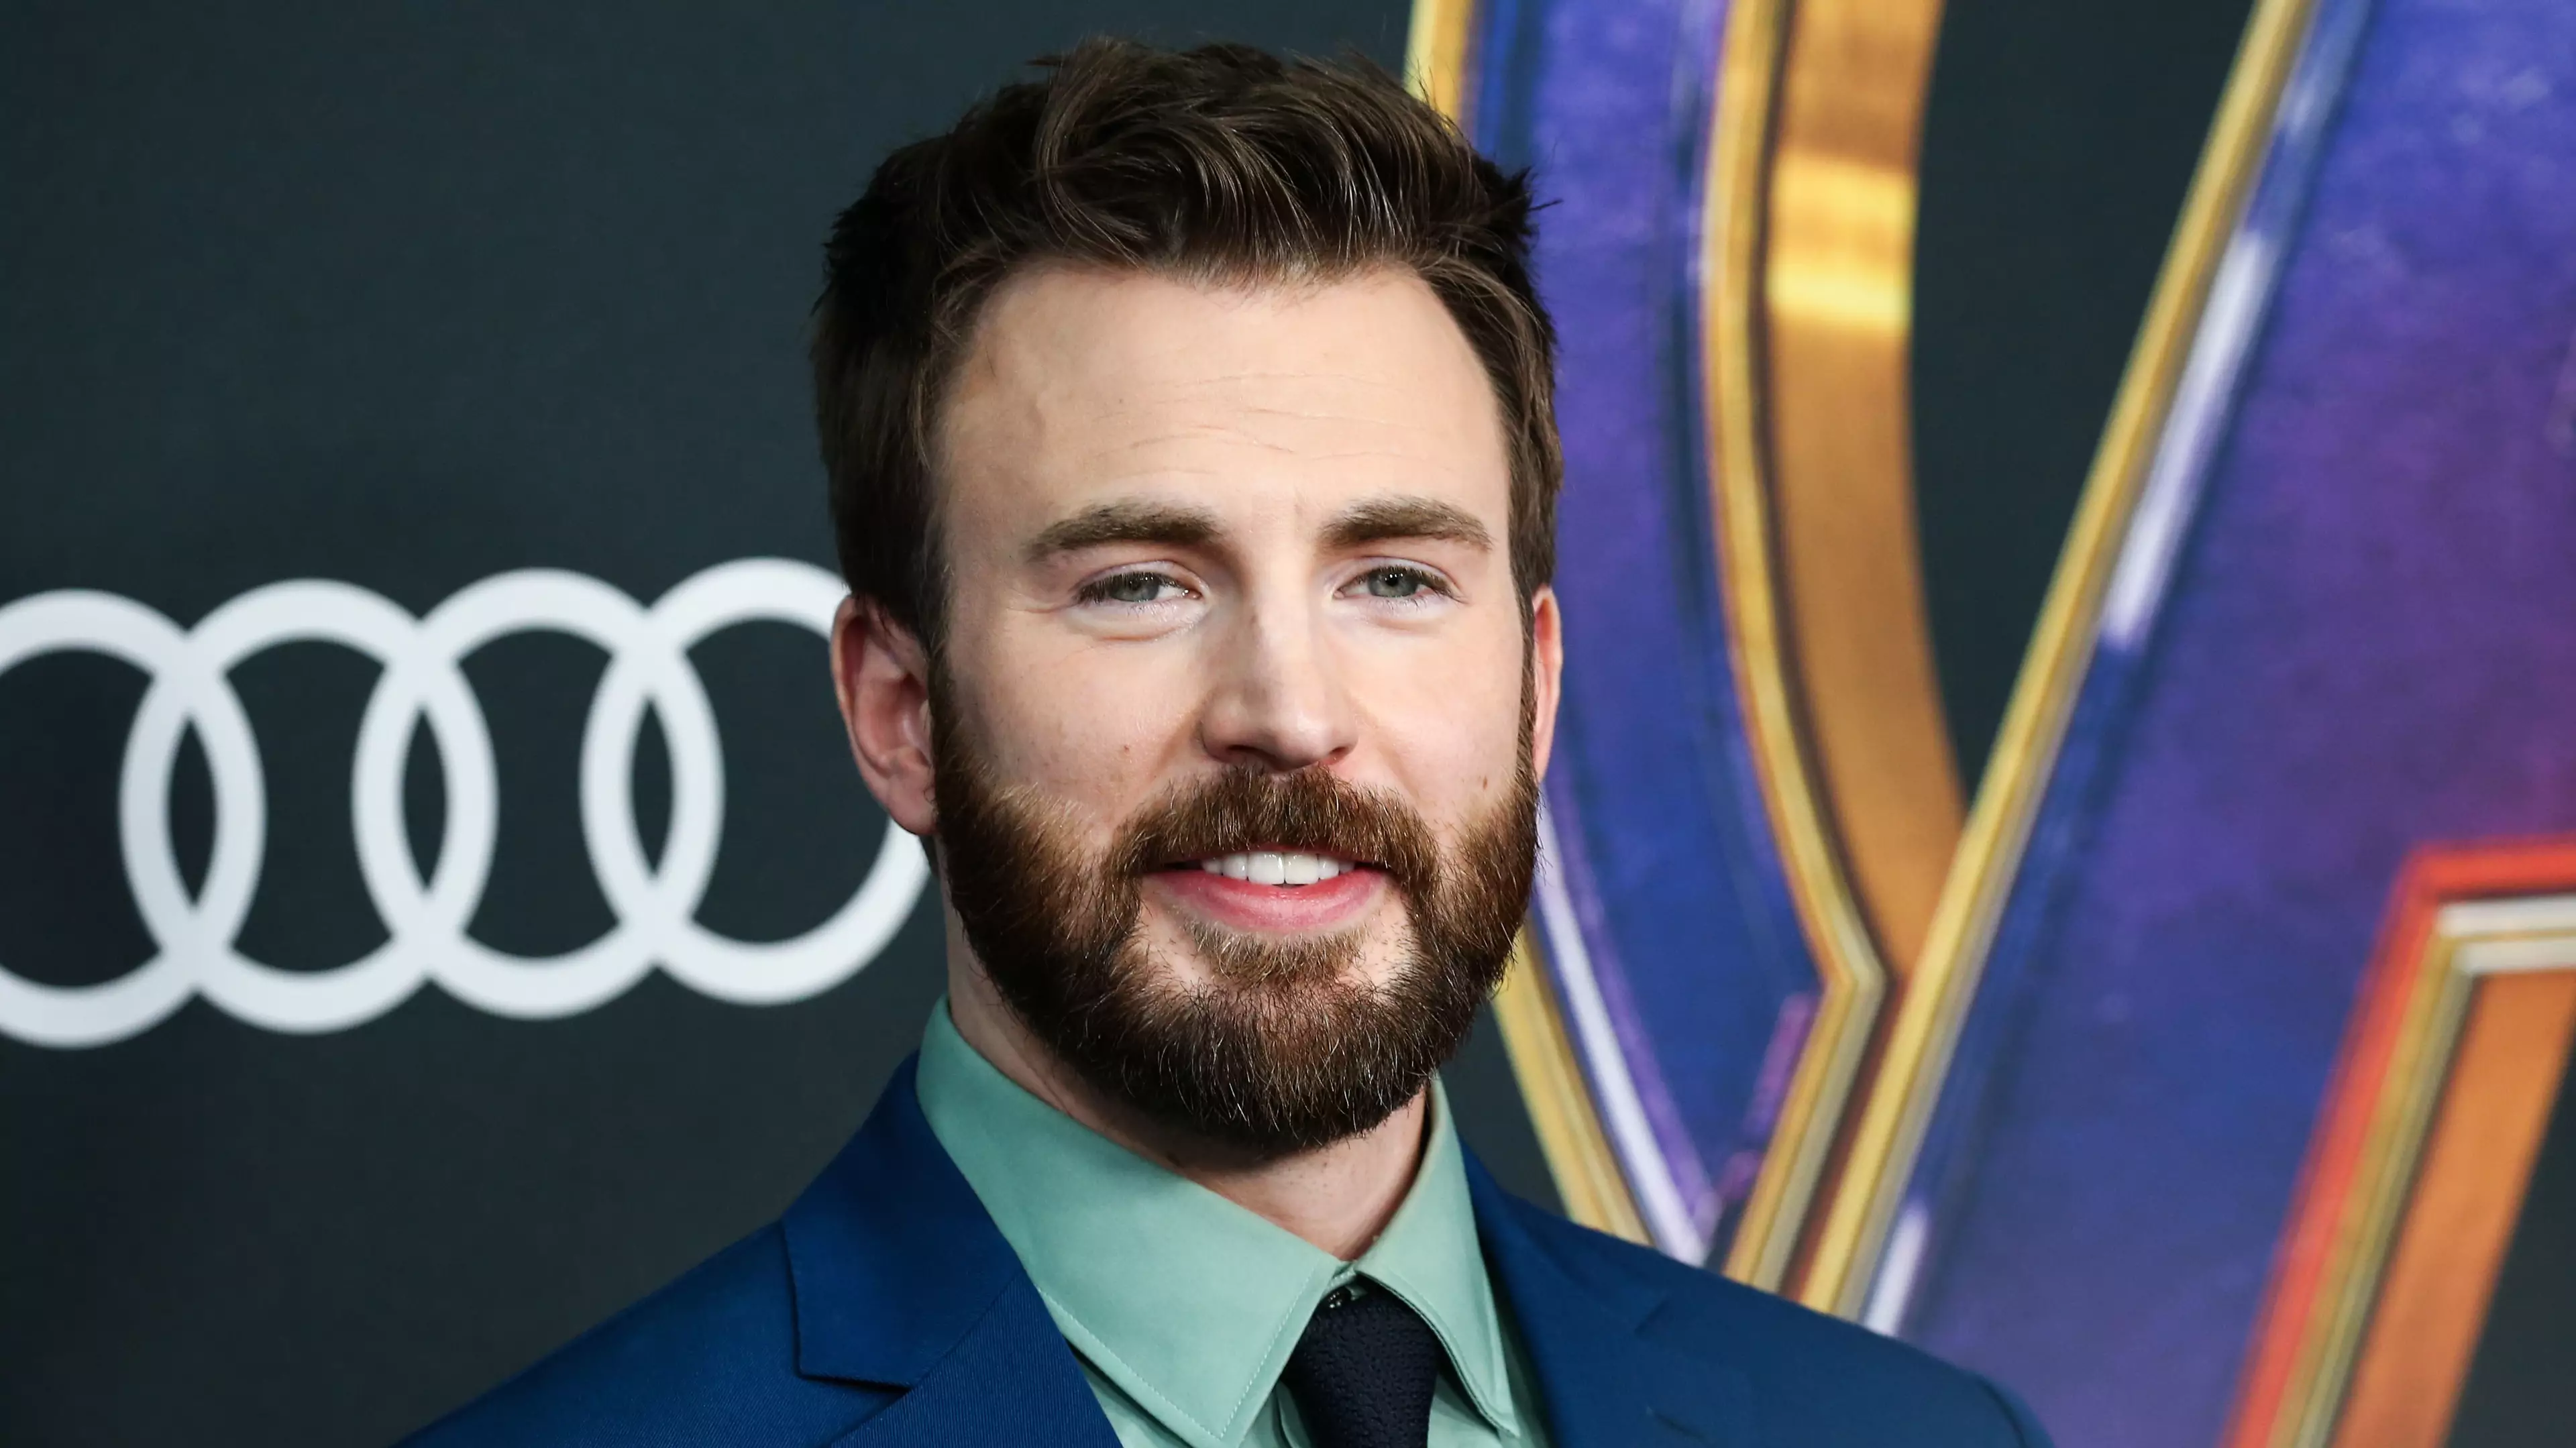 Chris Evans Cried At The End Of Avengers: Endgame